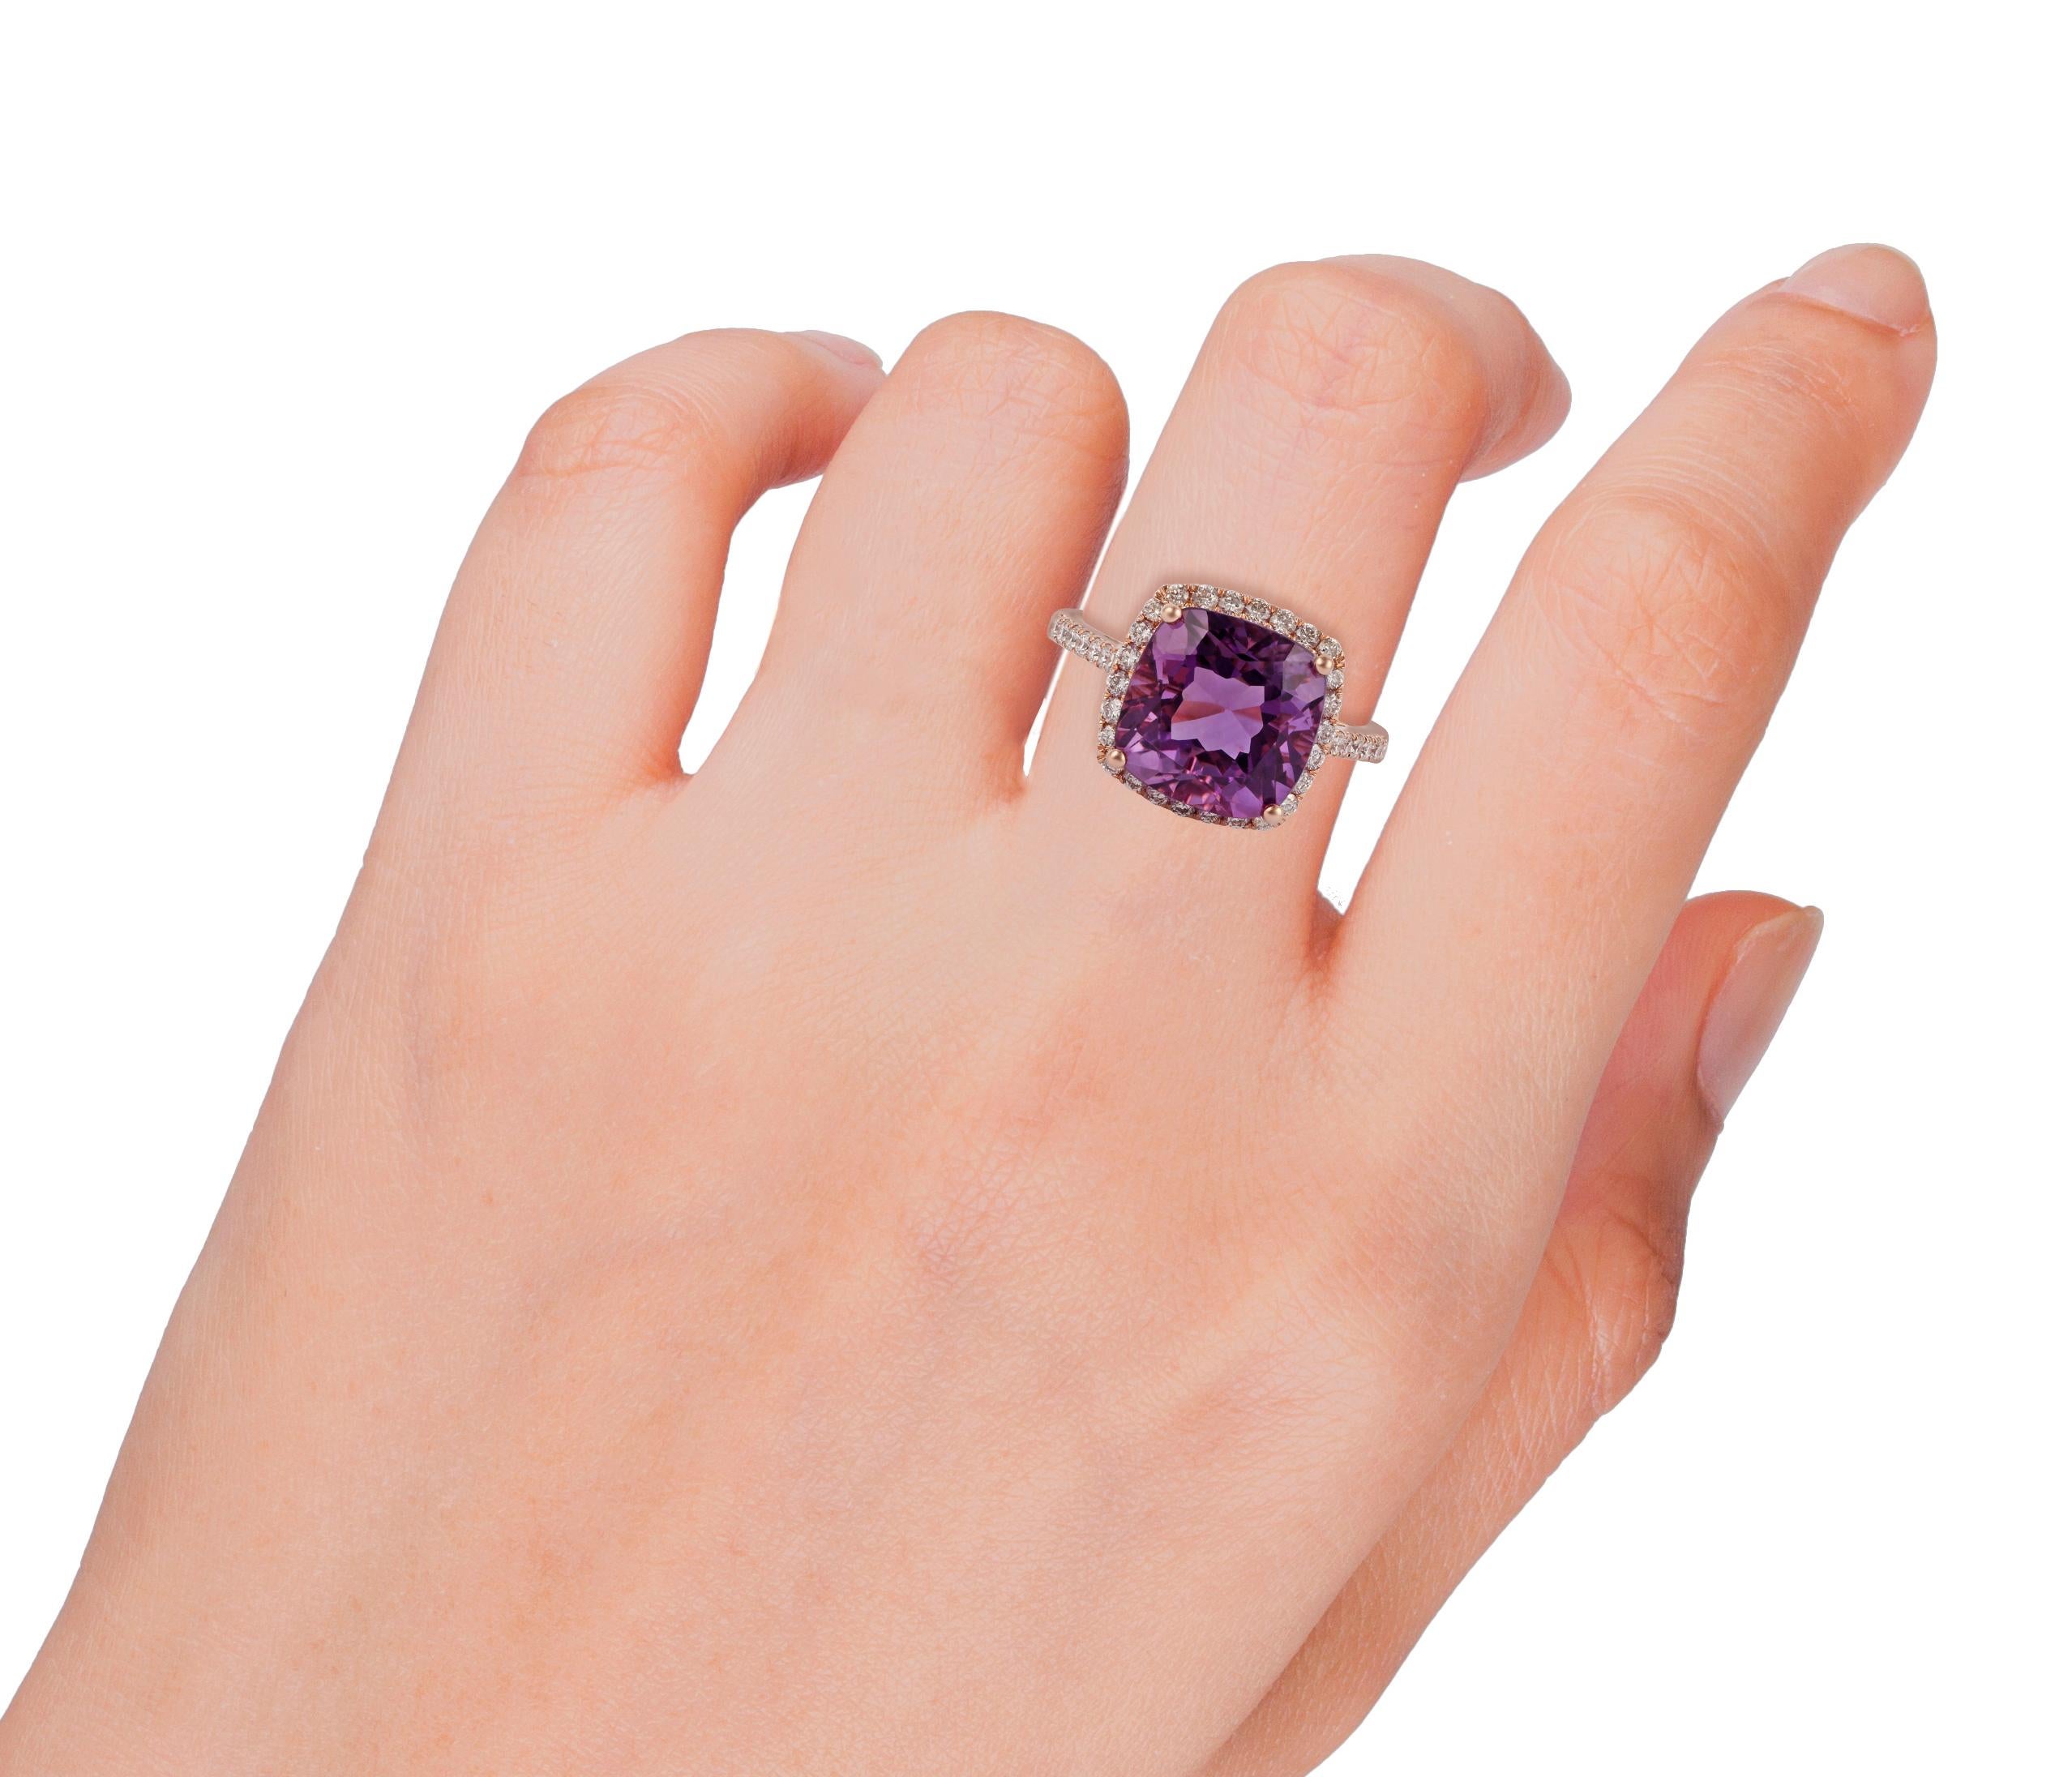 4.63 Carat Amethyst Diamond Ring Studded in 18K Rose Gold In New Condition For Sale In Jaipur, Rajasthan